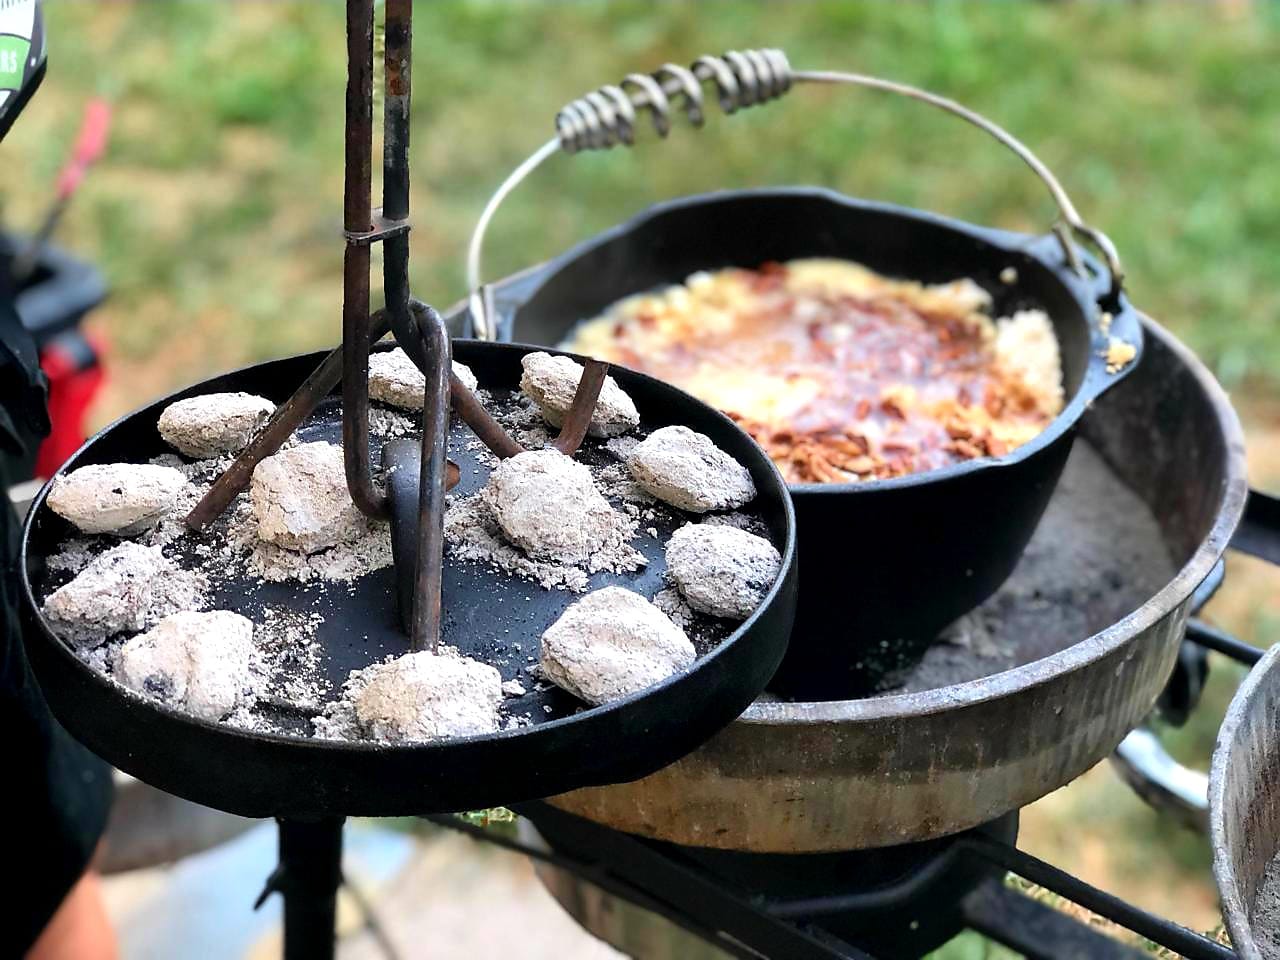 So what do you want to know about Dutch oven cooking?